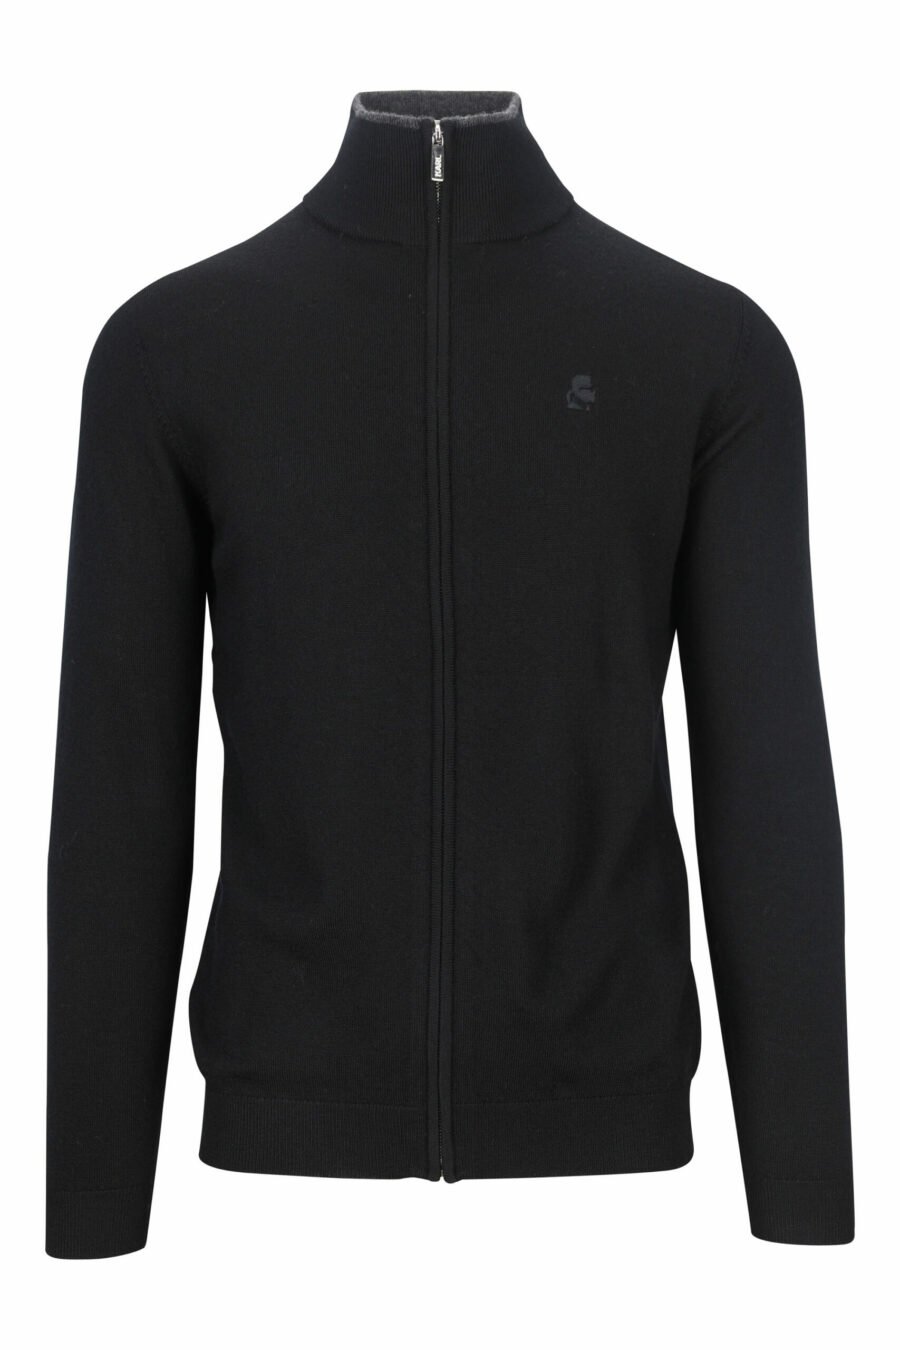 Black sweatshirt with zip and monochrome minilogue - 4062226635752 scaled